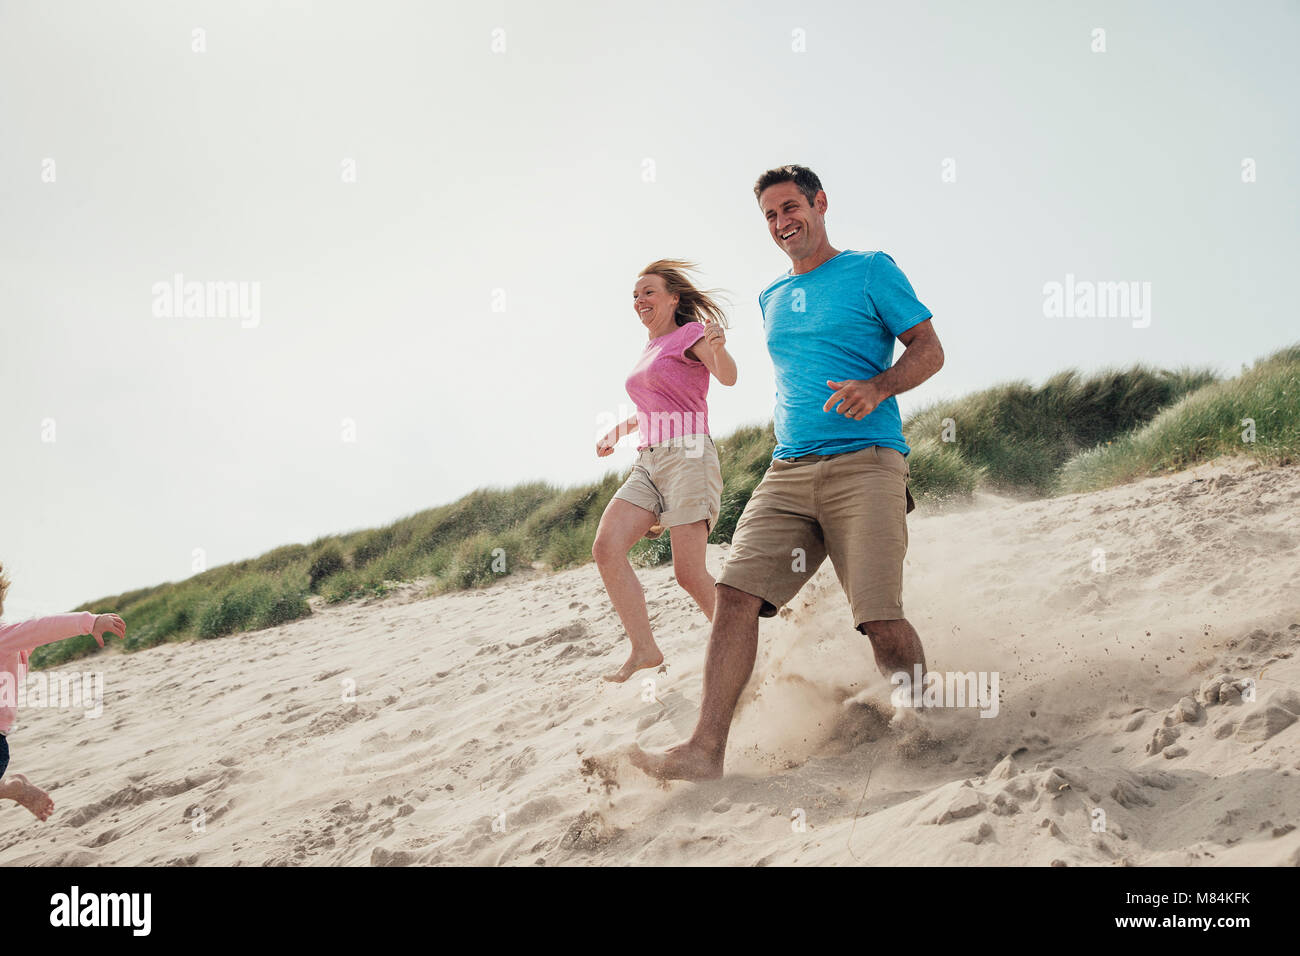 Low angle view of couple racing down a sand dune while on holiday at the seaside. Stock Photo